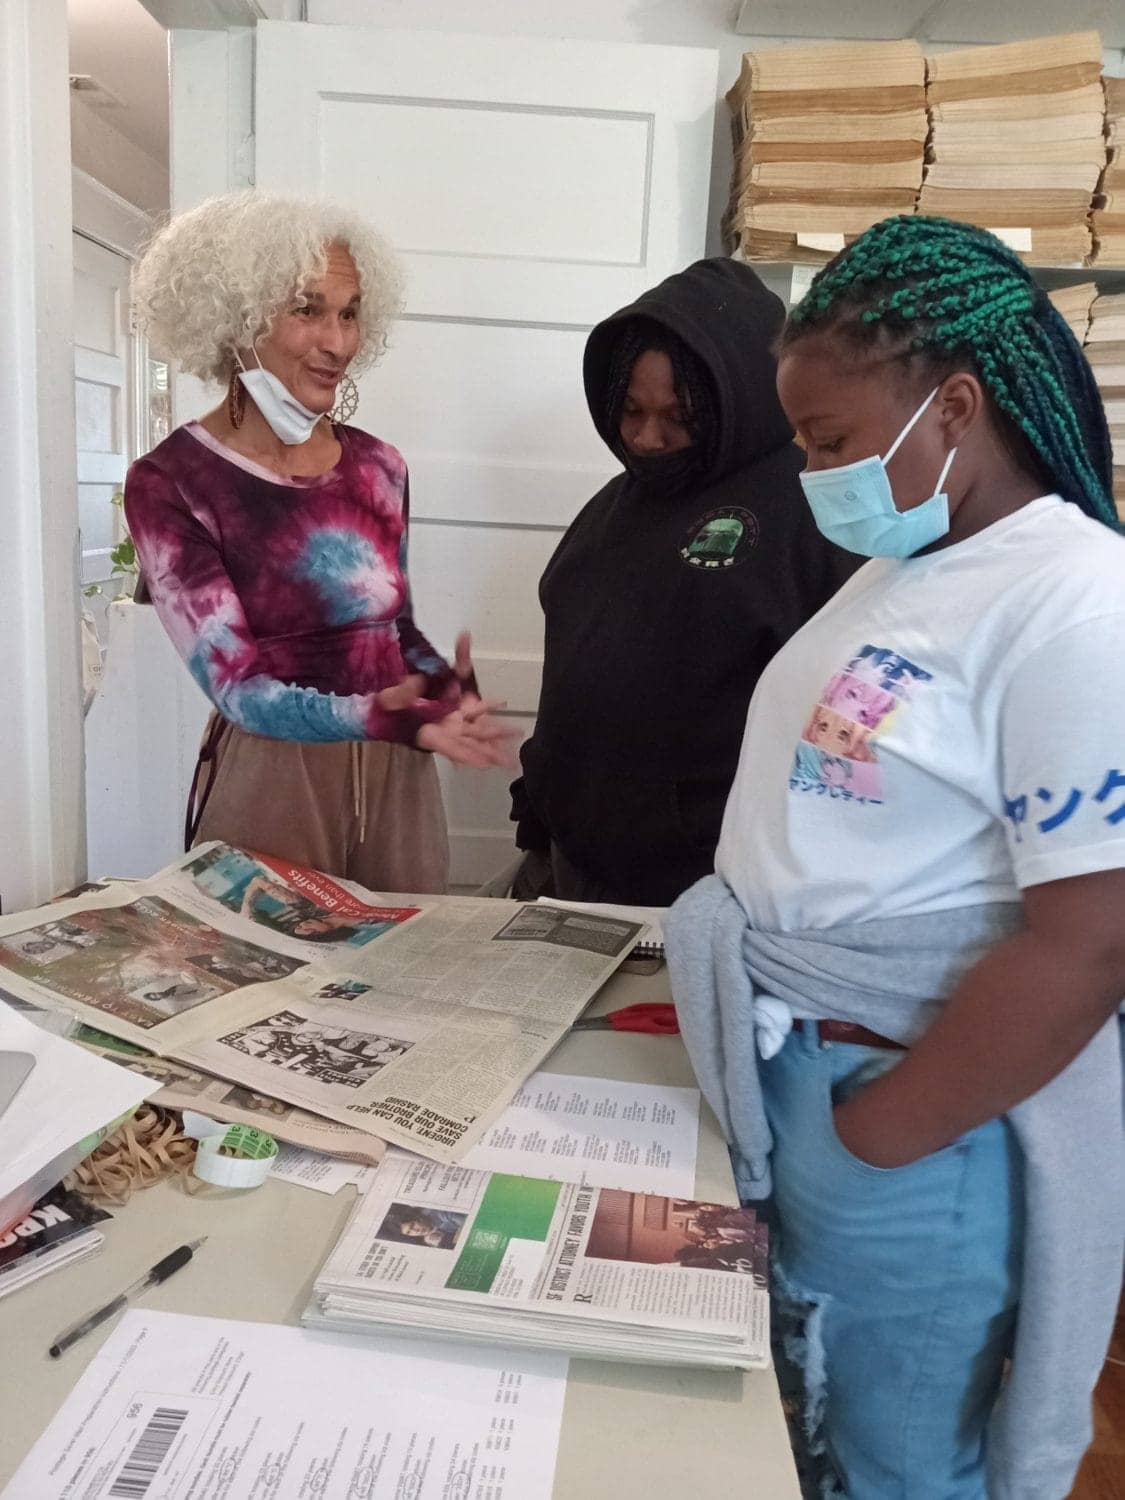 Nube-Ahmilah-and-Laila-at-the-Bay-View-Weaponization-of-Media-class-by-JR-110222JPG, <strong>In East Oakland, JR Valrey teaches youth to use media against the system</strong>, Culture Currents Local News & Views News & Views 